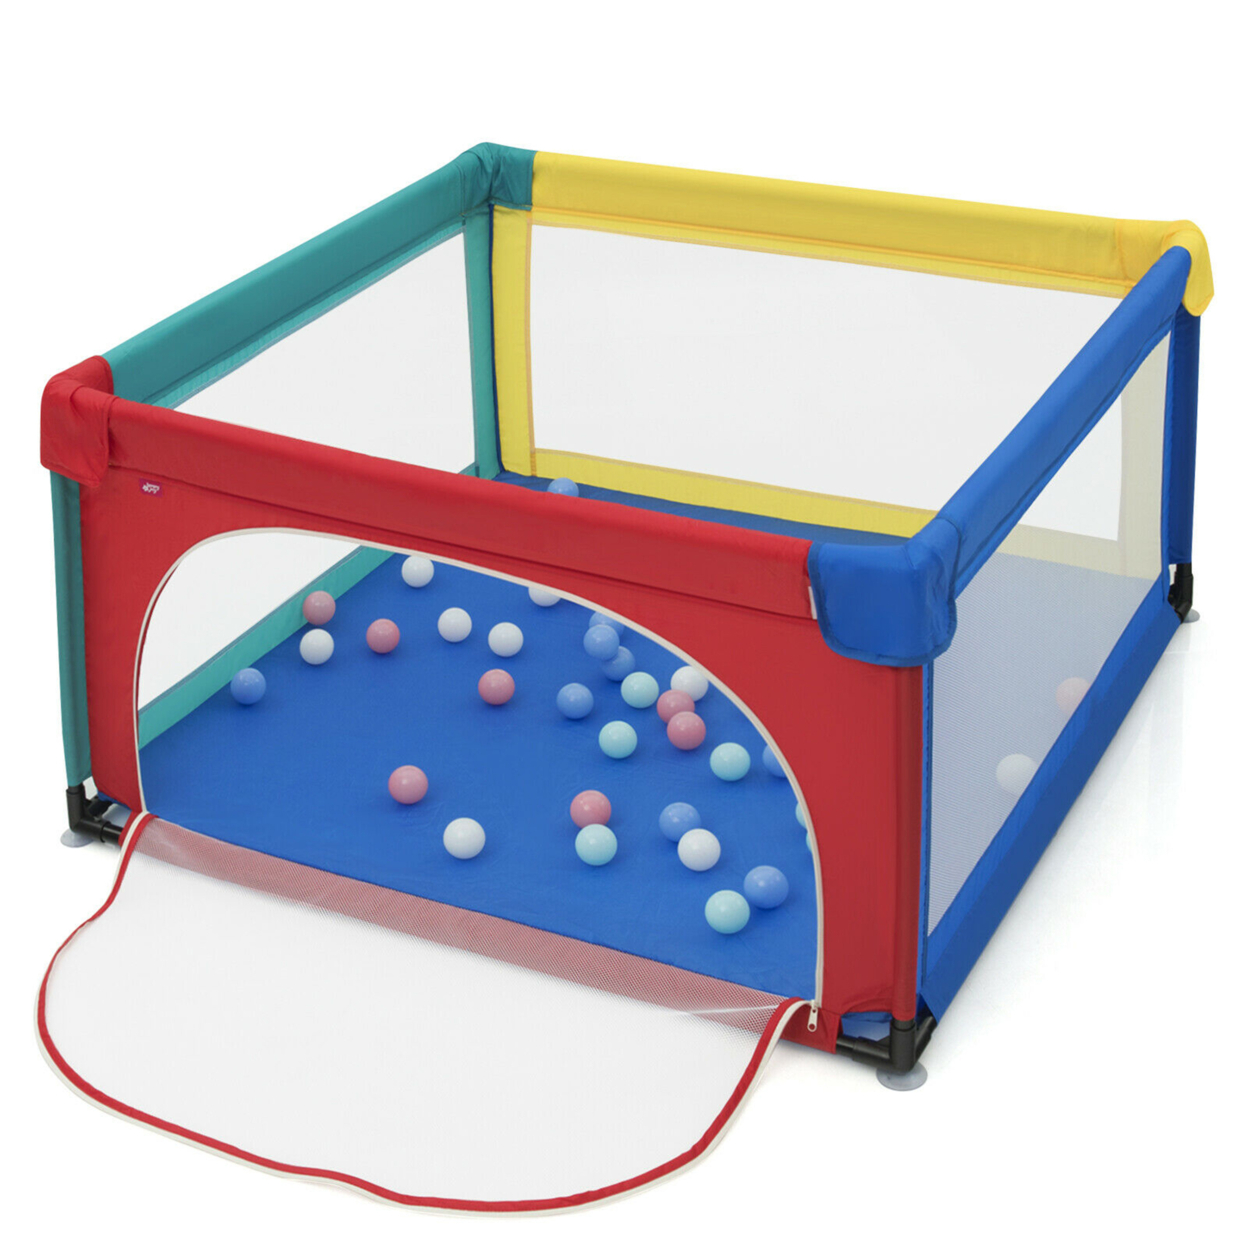 Baby Playpen Infant Large Safety Play Center Yard W/ 50 Ocean Balls - Multi-color